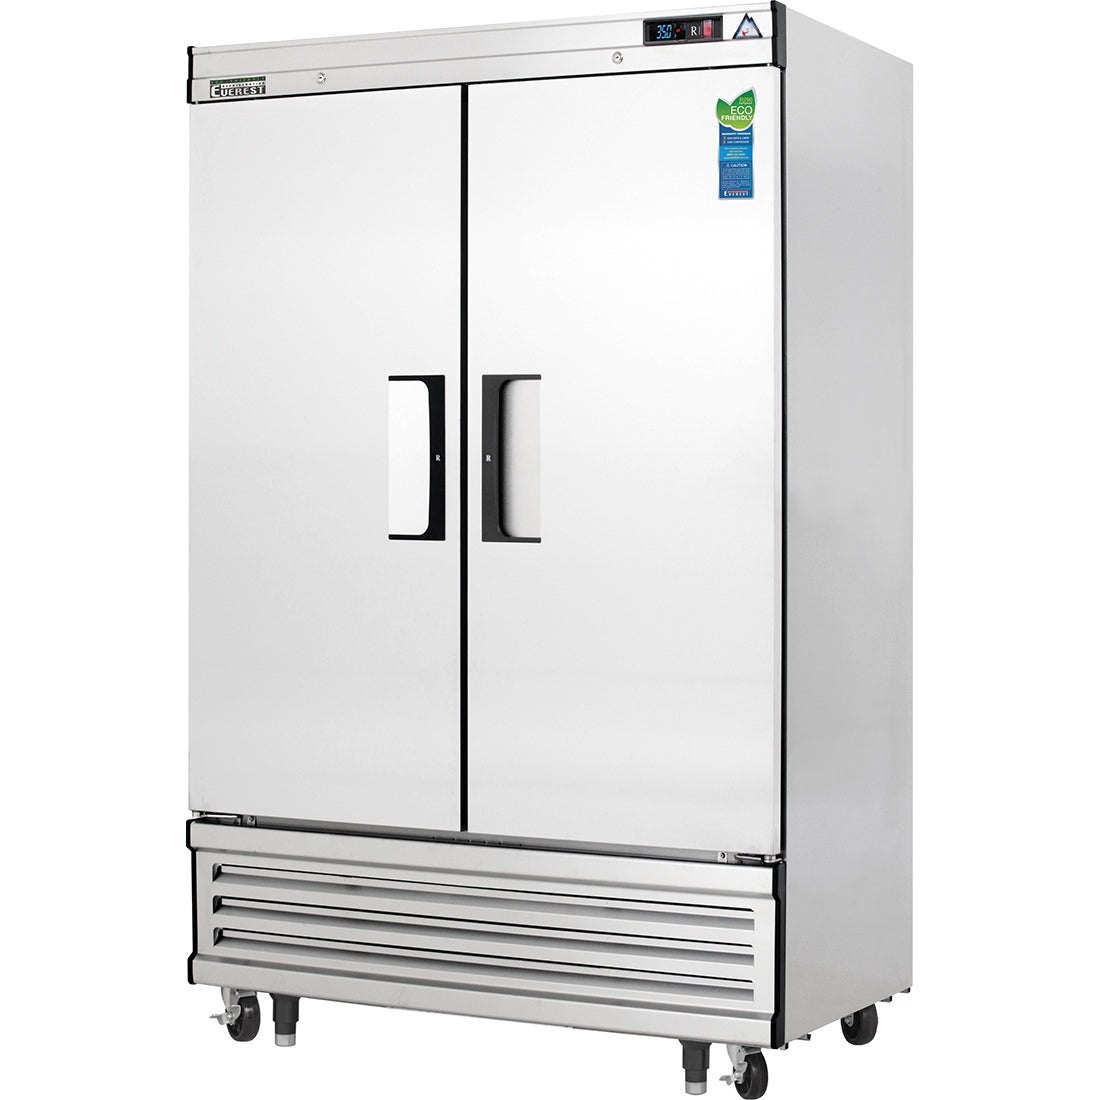 Everest EB Series-EBSR2 Two Section Solid Door Upright Reach-In Refrigerator - 48 Cu. Ft.